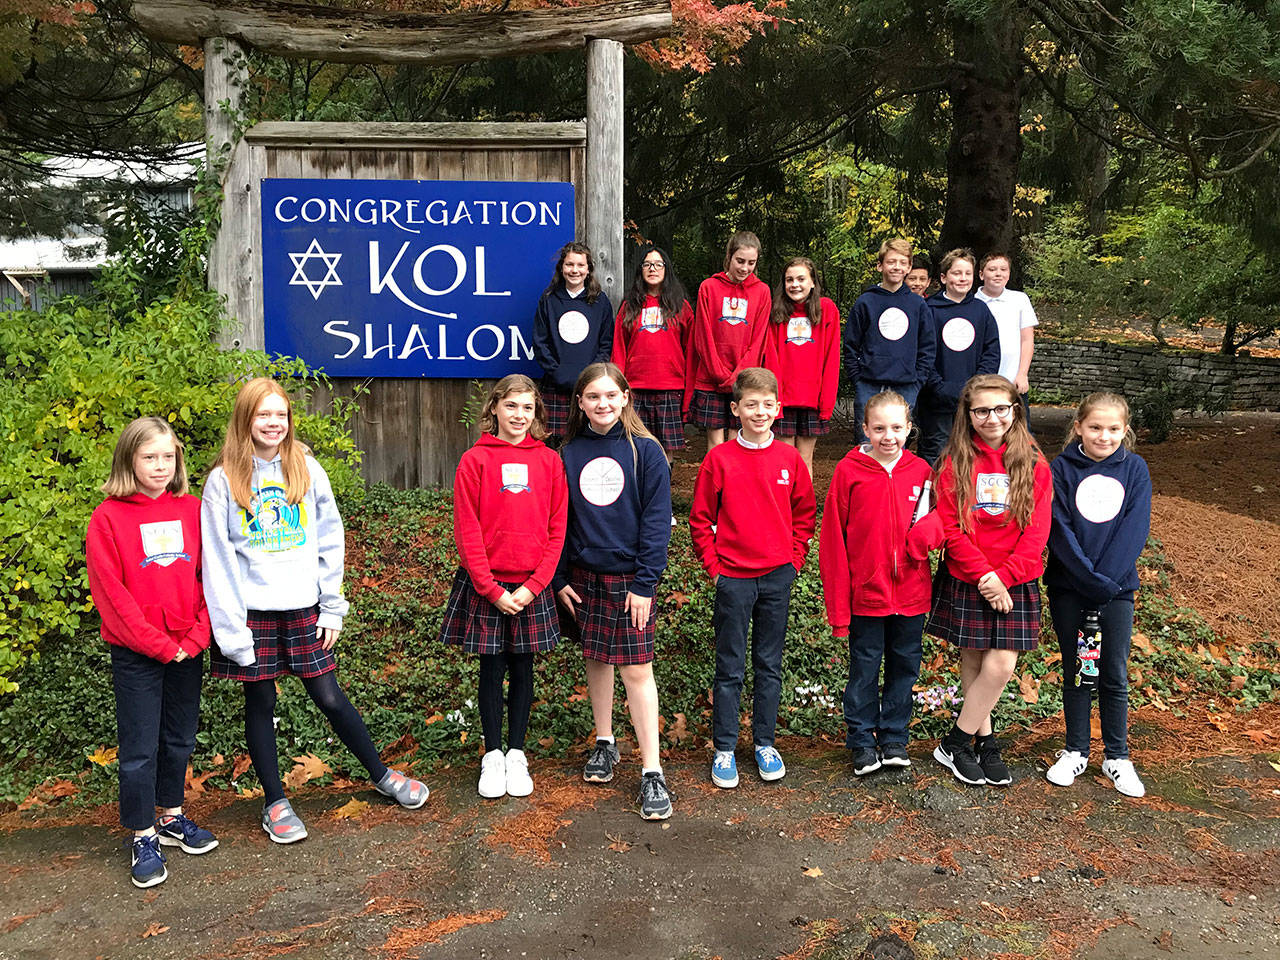 Photo courtesy of Susan Kilbane | Fifth- and sixth-graders from Saint Cecilia Catholic School visited Congregation Kol Shalom to learn about the history and traditions of the Jewish community on Oct. 18.